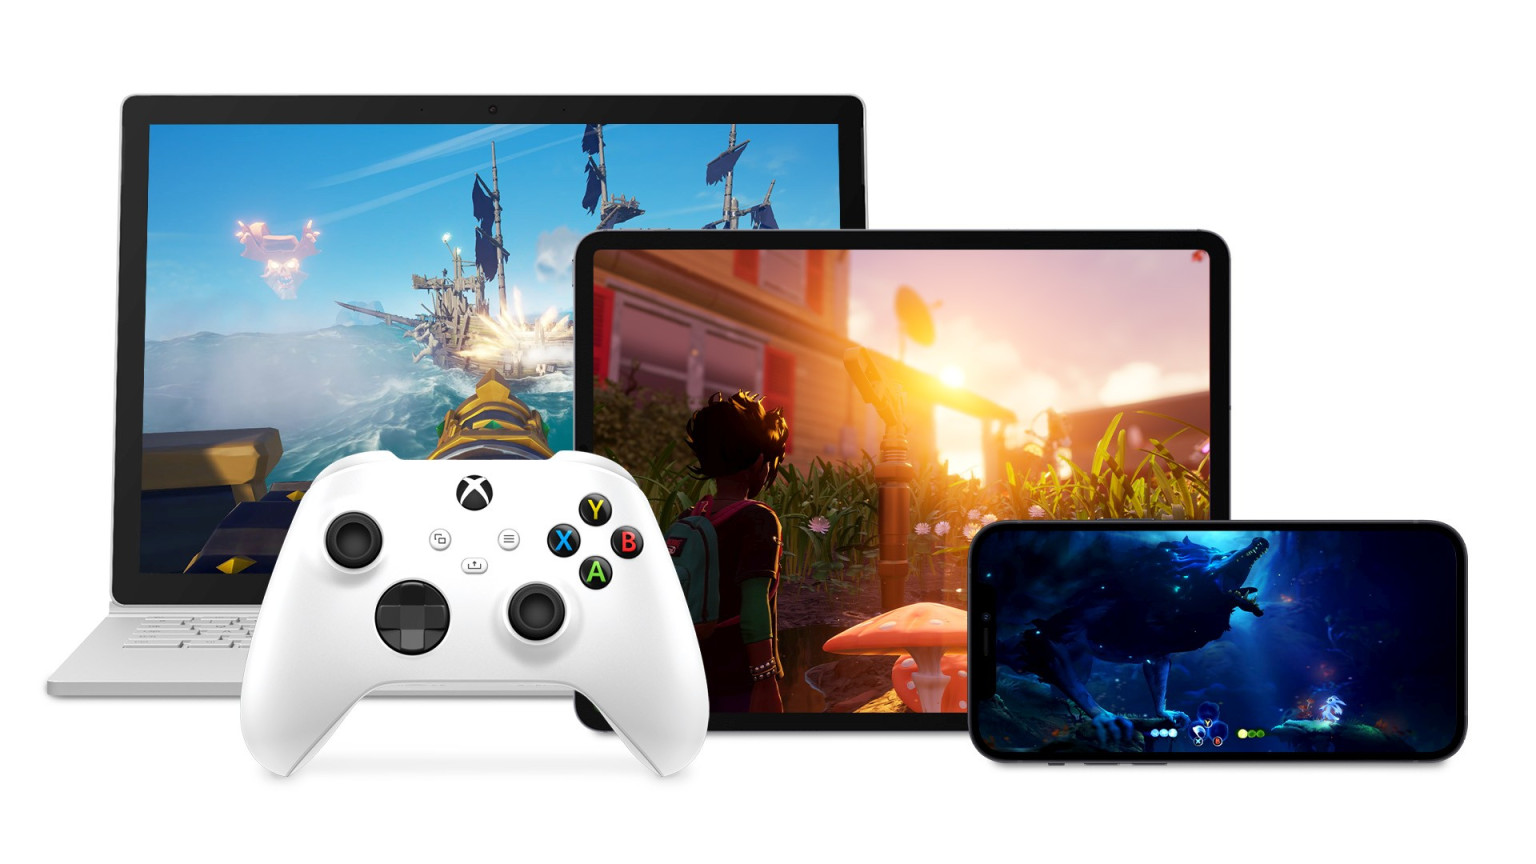 Media: Microsoft will release a game streaming device and Xbox Cloud Gaming app for Samsung TVs